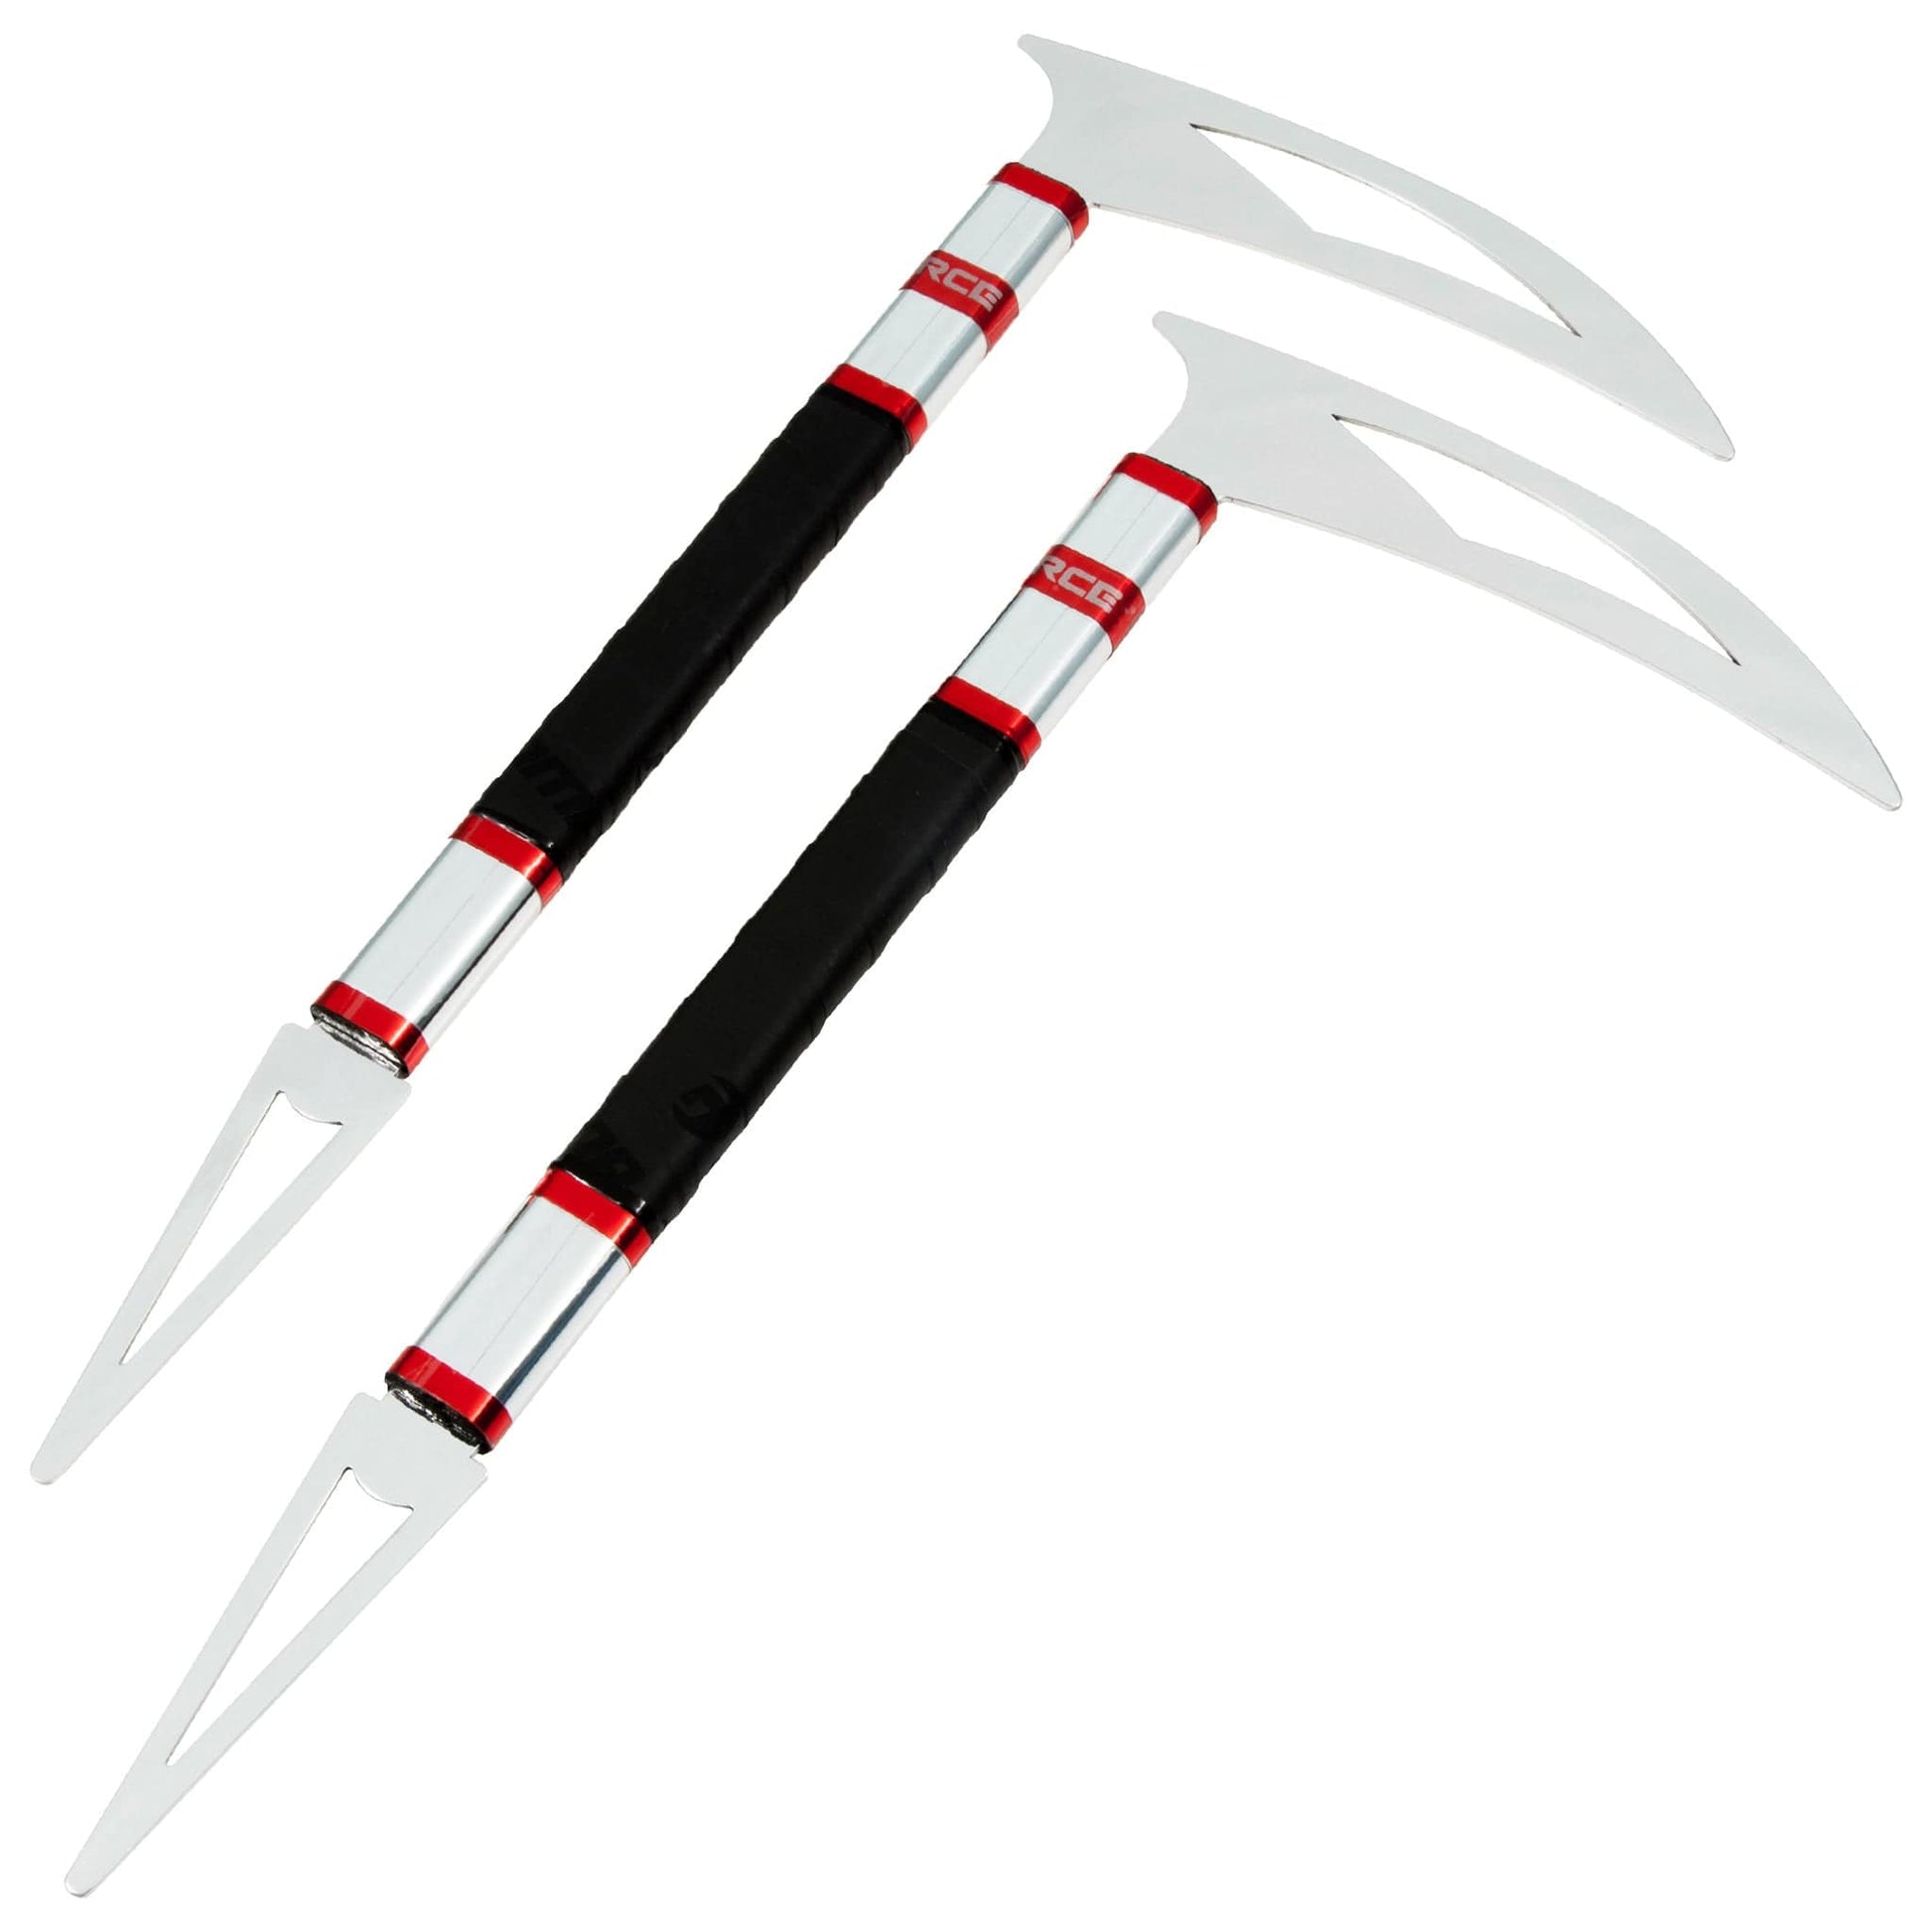 ProForce sporting goods Chrome/Red G-Force Switchblade Kama martial arts karate demo